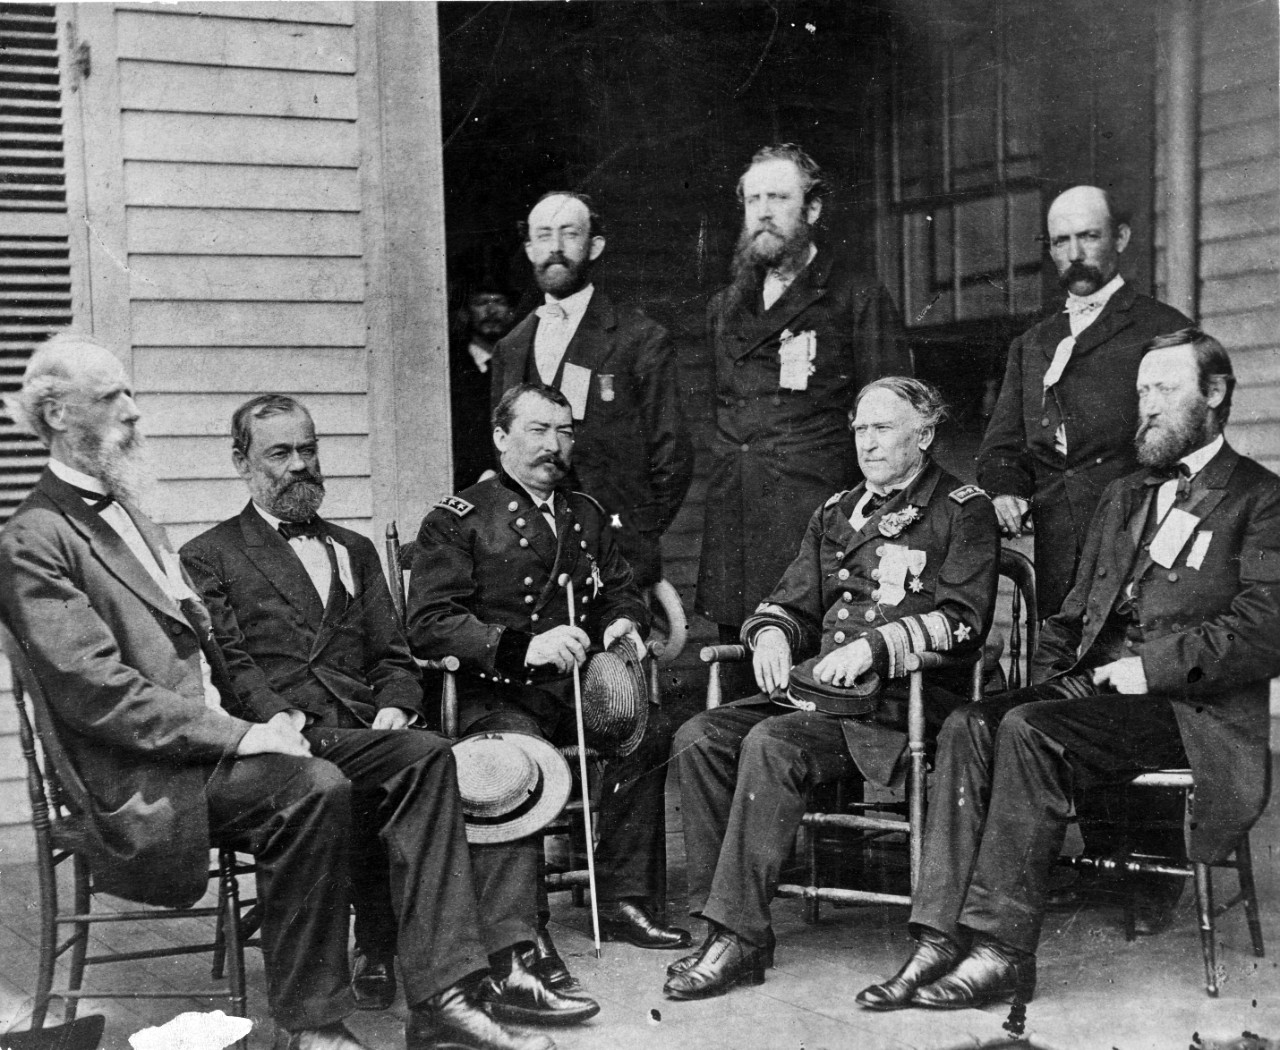 Admiral David G. Farragut (seated 4th from left) and General H. B. Sergeant (standing in center, rear)